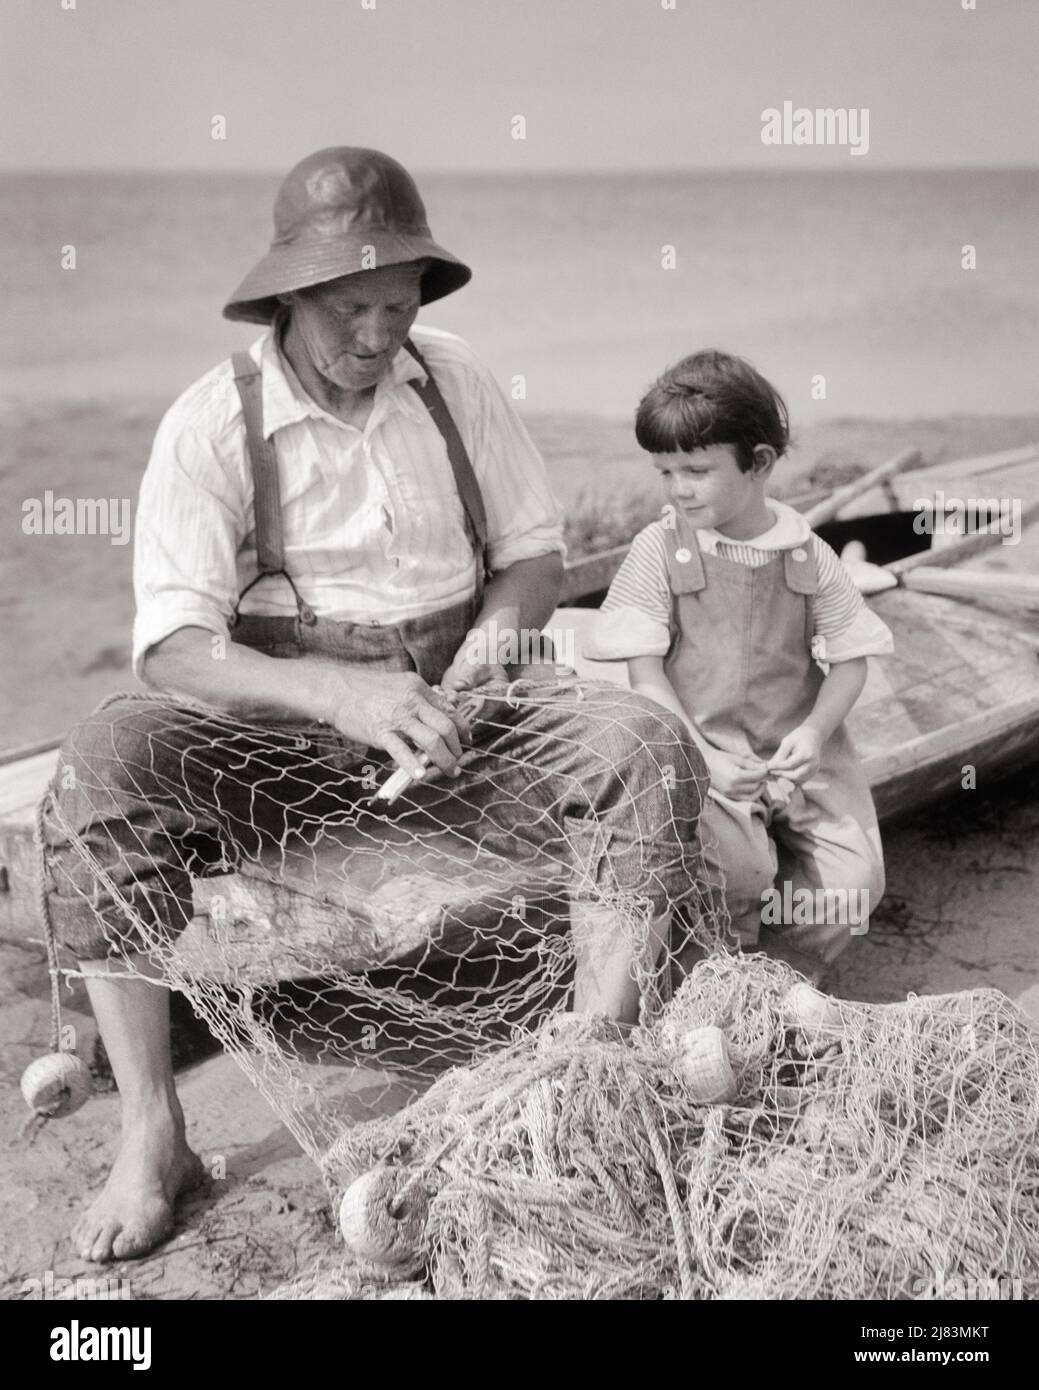 1920s YOUNG BOY SITTING ON BOAT BESIDE SENIOR MAN FISHERMAN WEARIING A SOU’WESTER HAT REPAIRING HIS FISHING NETS - j279 HAR001 HARS ELDER FISHERMAN RURAL COPY SPACE YOU FRIENDSHIP HALF-LENGTH PERSONS INSPIRATION MALES B&W HAPPINESS OLD AGE OLDSTERS HIGH ANGLE OLDSTER HIS KNOWLEDGE NETS YOUNG AND OLD ELDERS REPAIRING CONNECTION CONCEPTUAL BESIDE ELDERLY MAN GROWTH JUVENILES TOGETHERNESS YOUNGSTER BLACK AND WHITE CAUCASIAN ETHNICITY HAR001 OLD FASHIONED Stock Photo